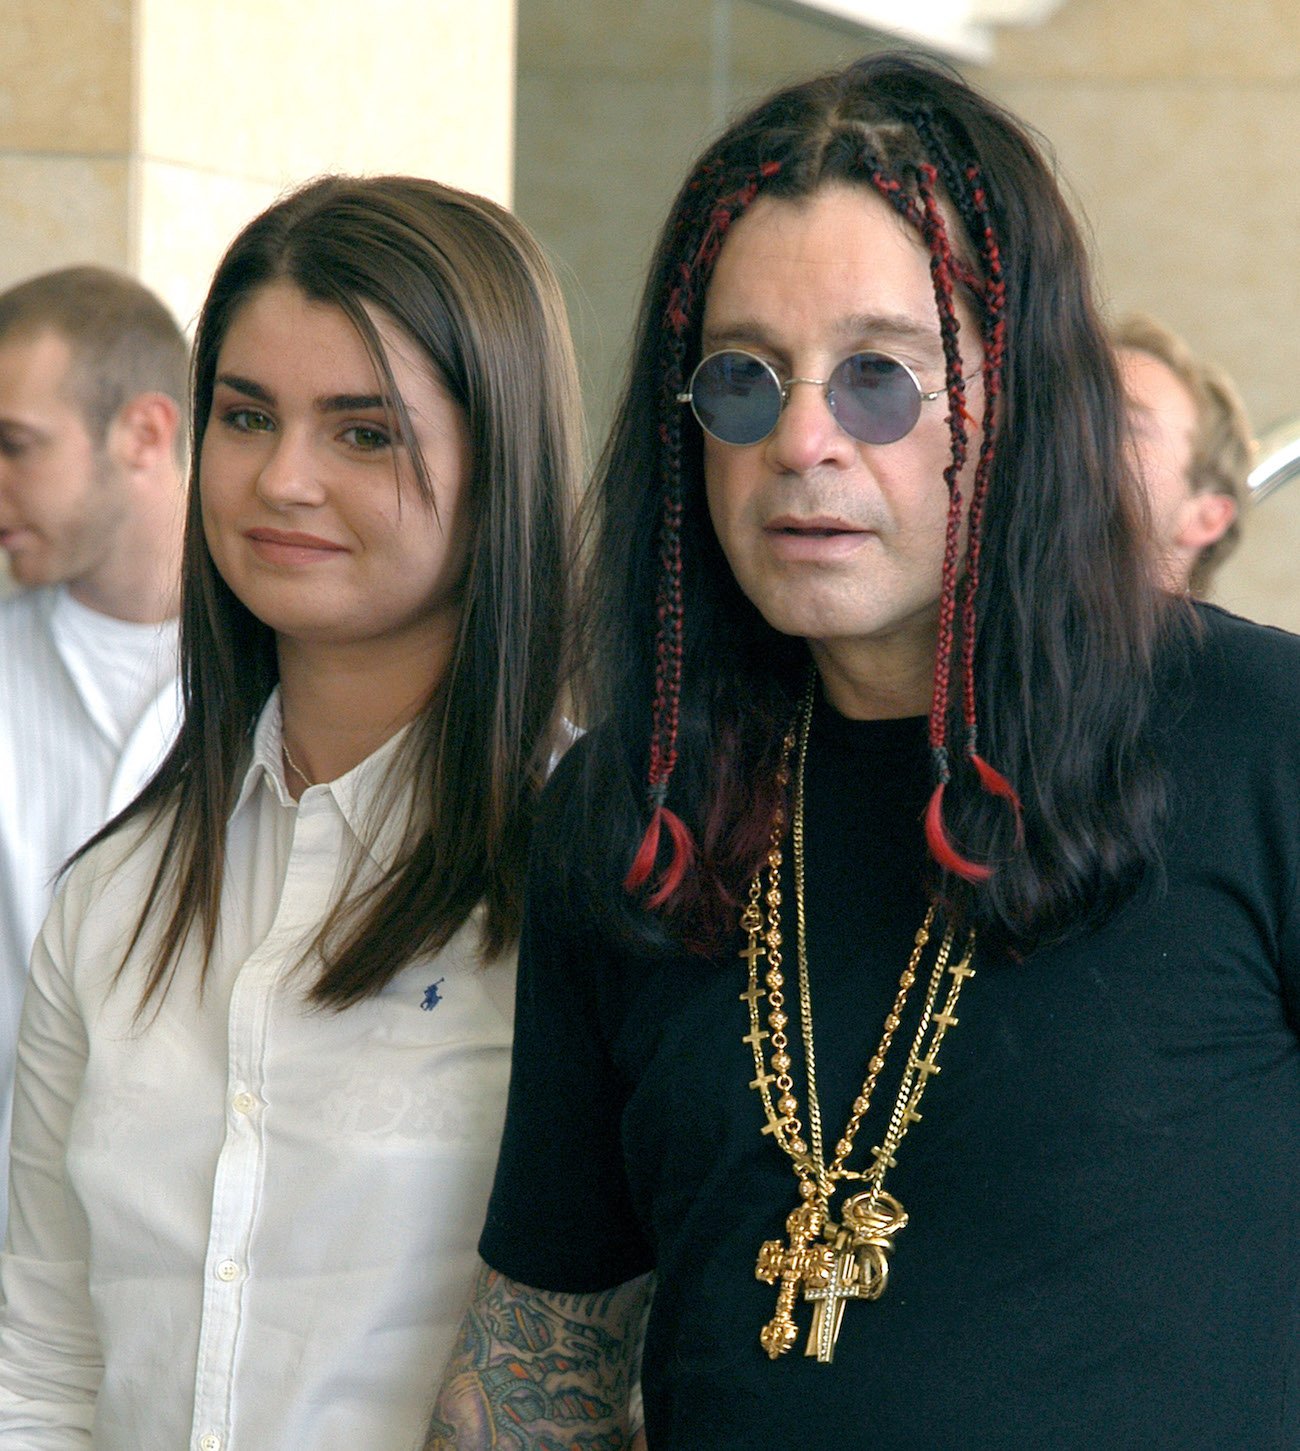 Ozzy Osbourne and his daughter Aimee at the TCA Cable Press tour in 2003.